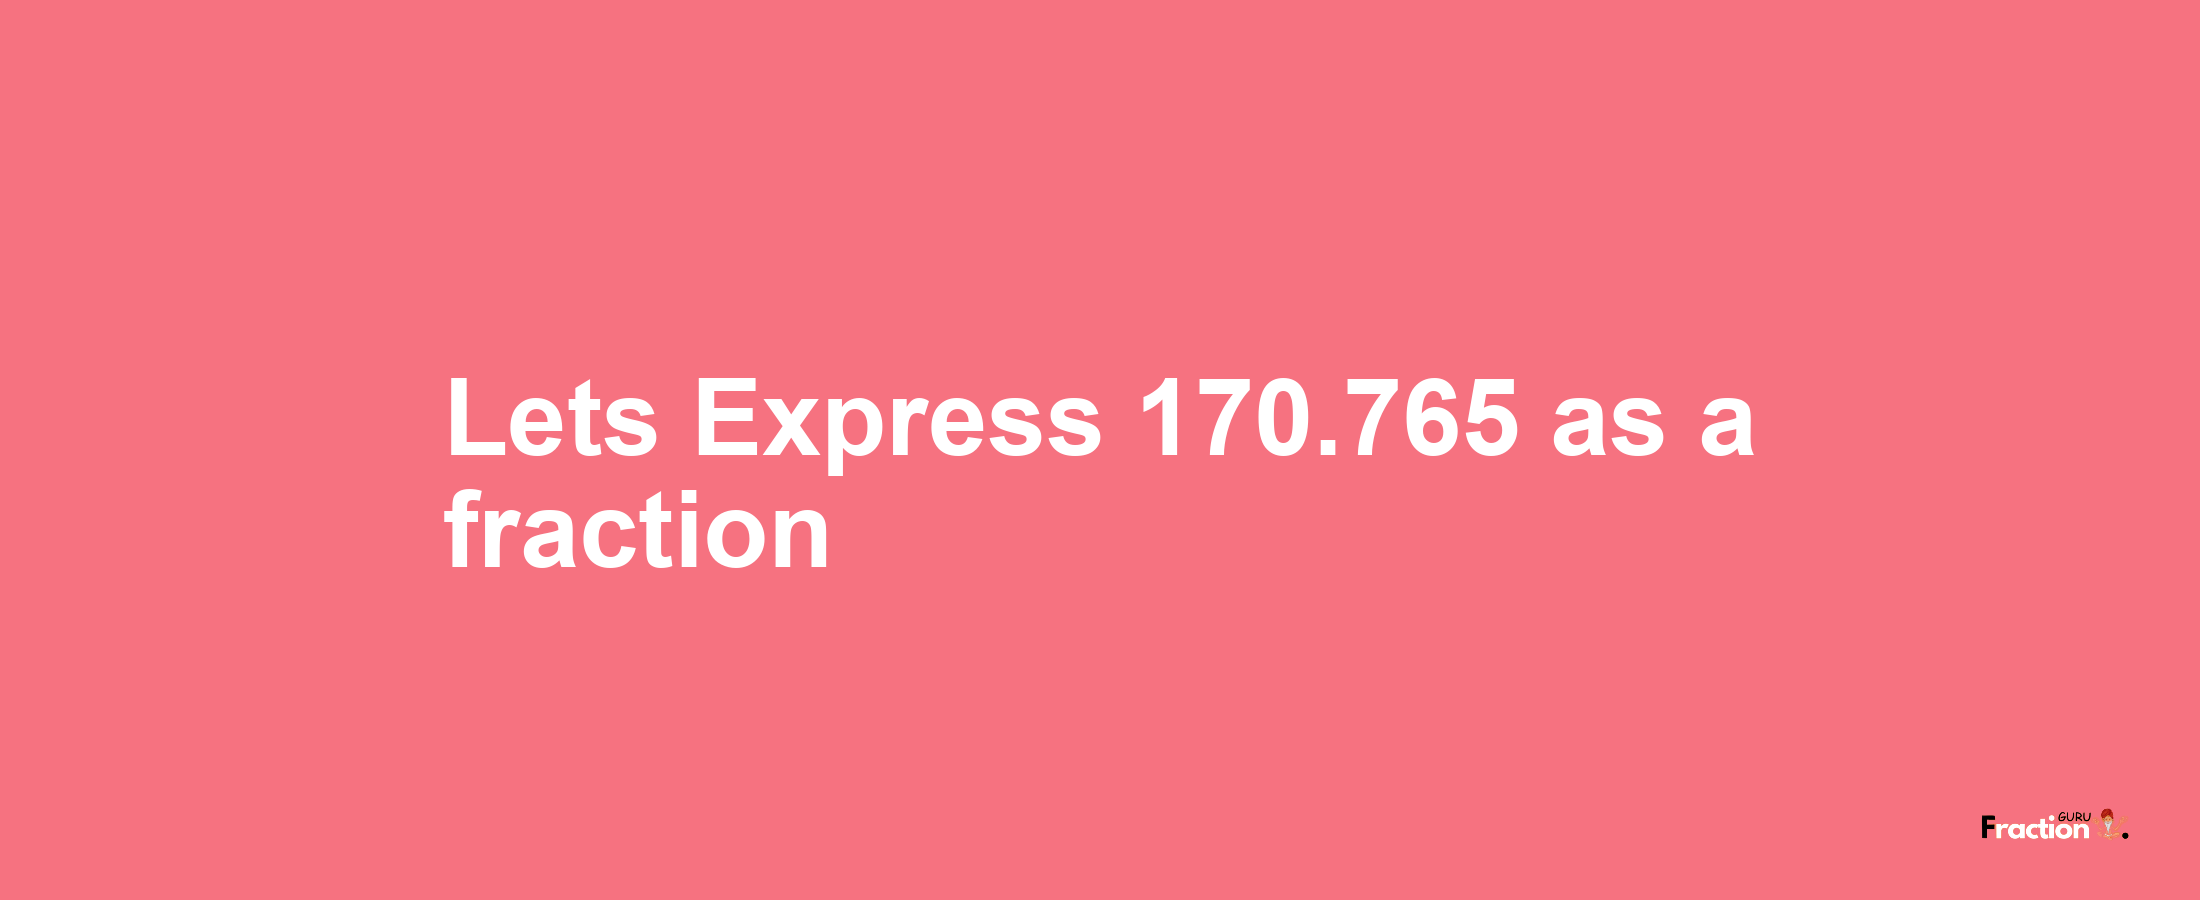 Lets Express 170.765 as afraction